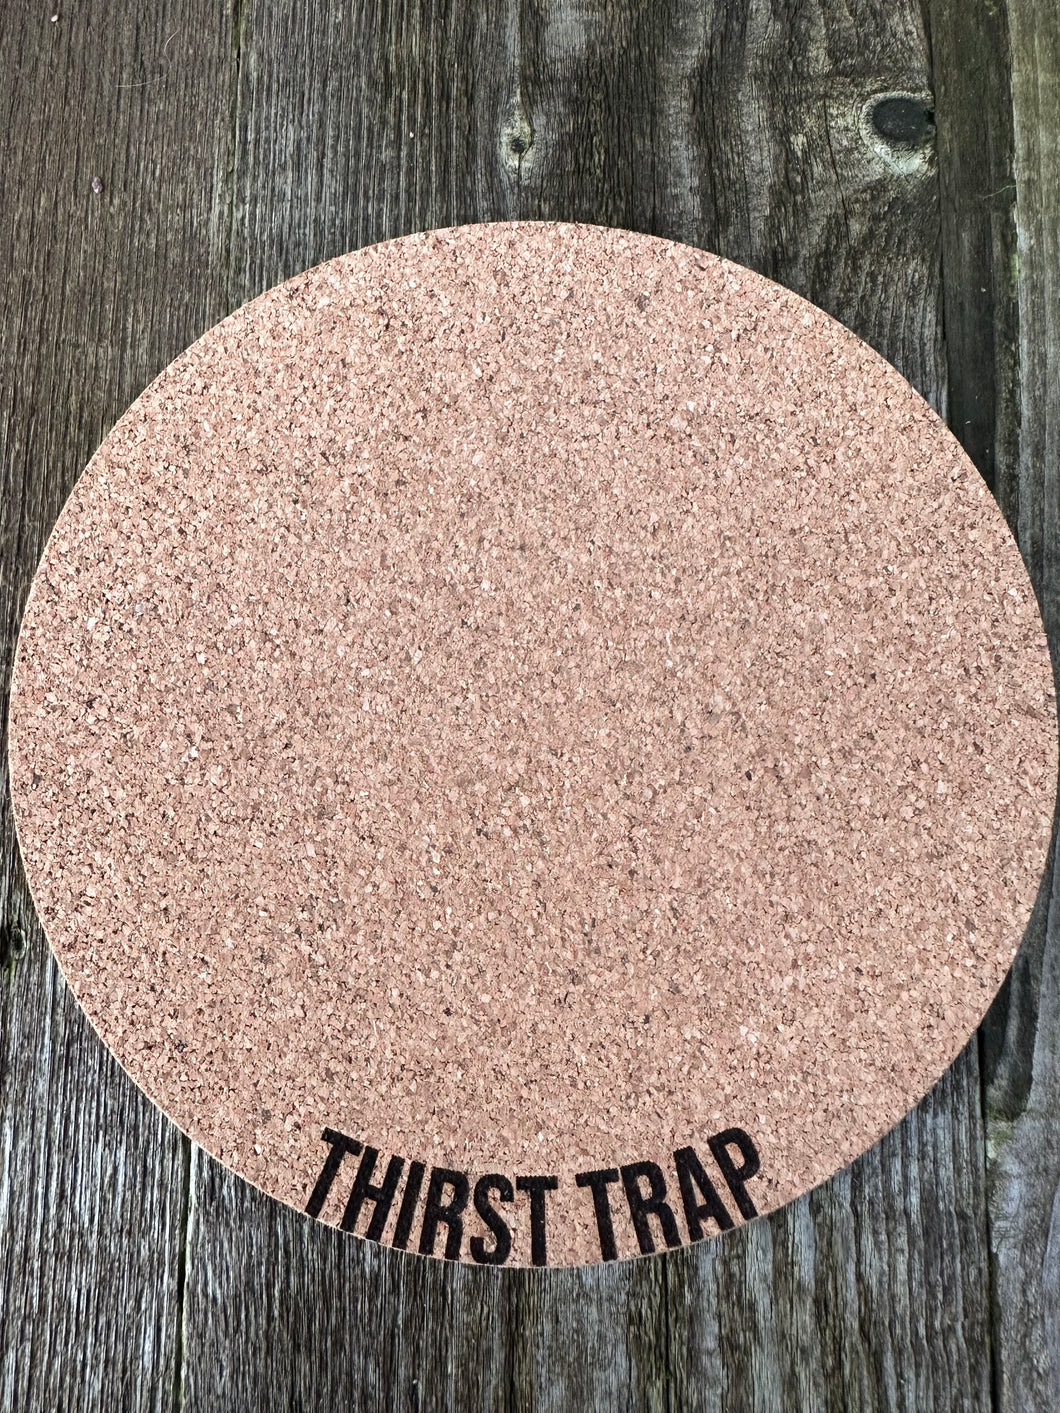 Thirst Trap Cork Plant Mat - Engraved Cork Round - Cork Bottom - No Plastic or Rubber - All Natural Material